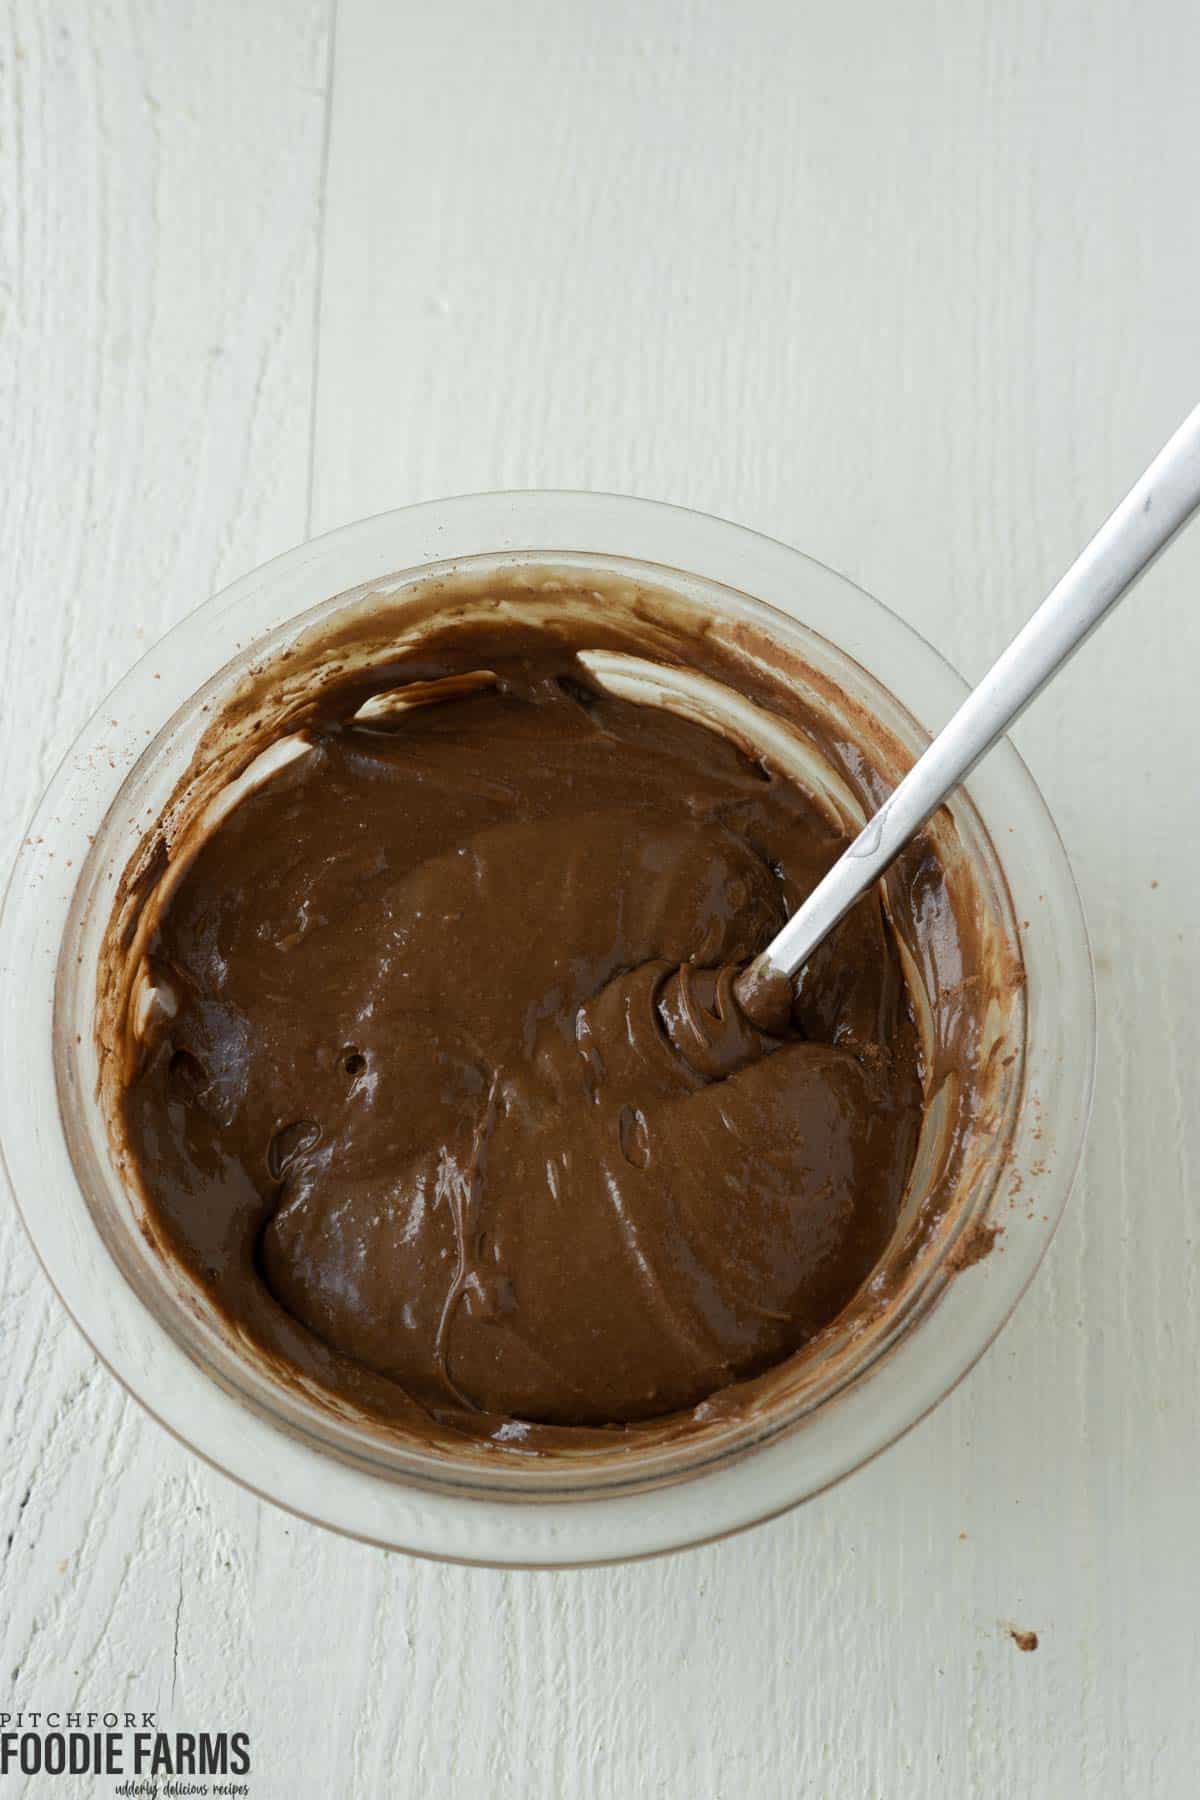 Chocolate and pistachio cake batter in a mixing bowl.